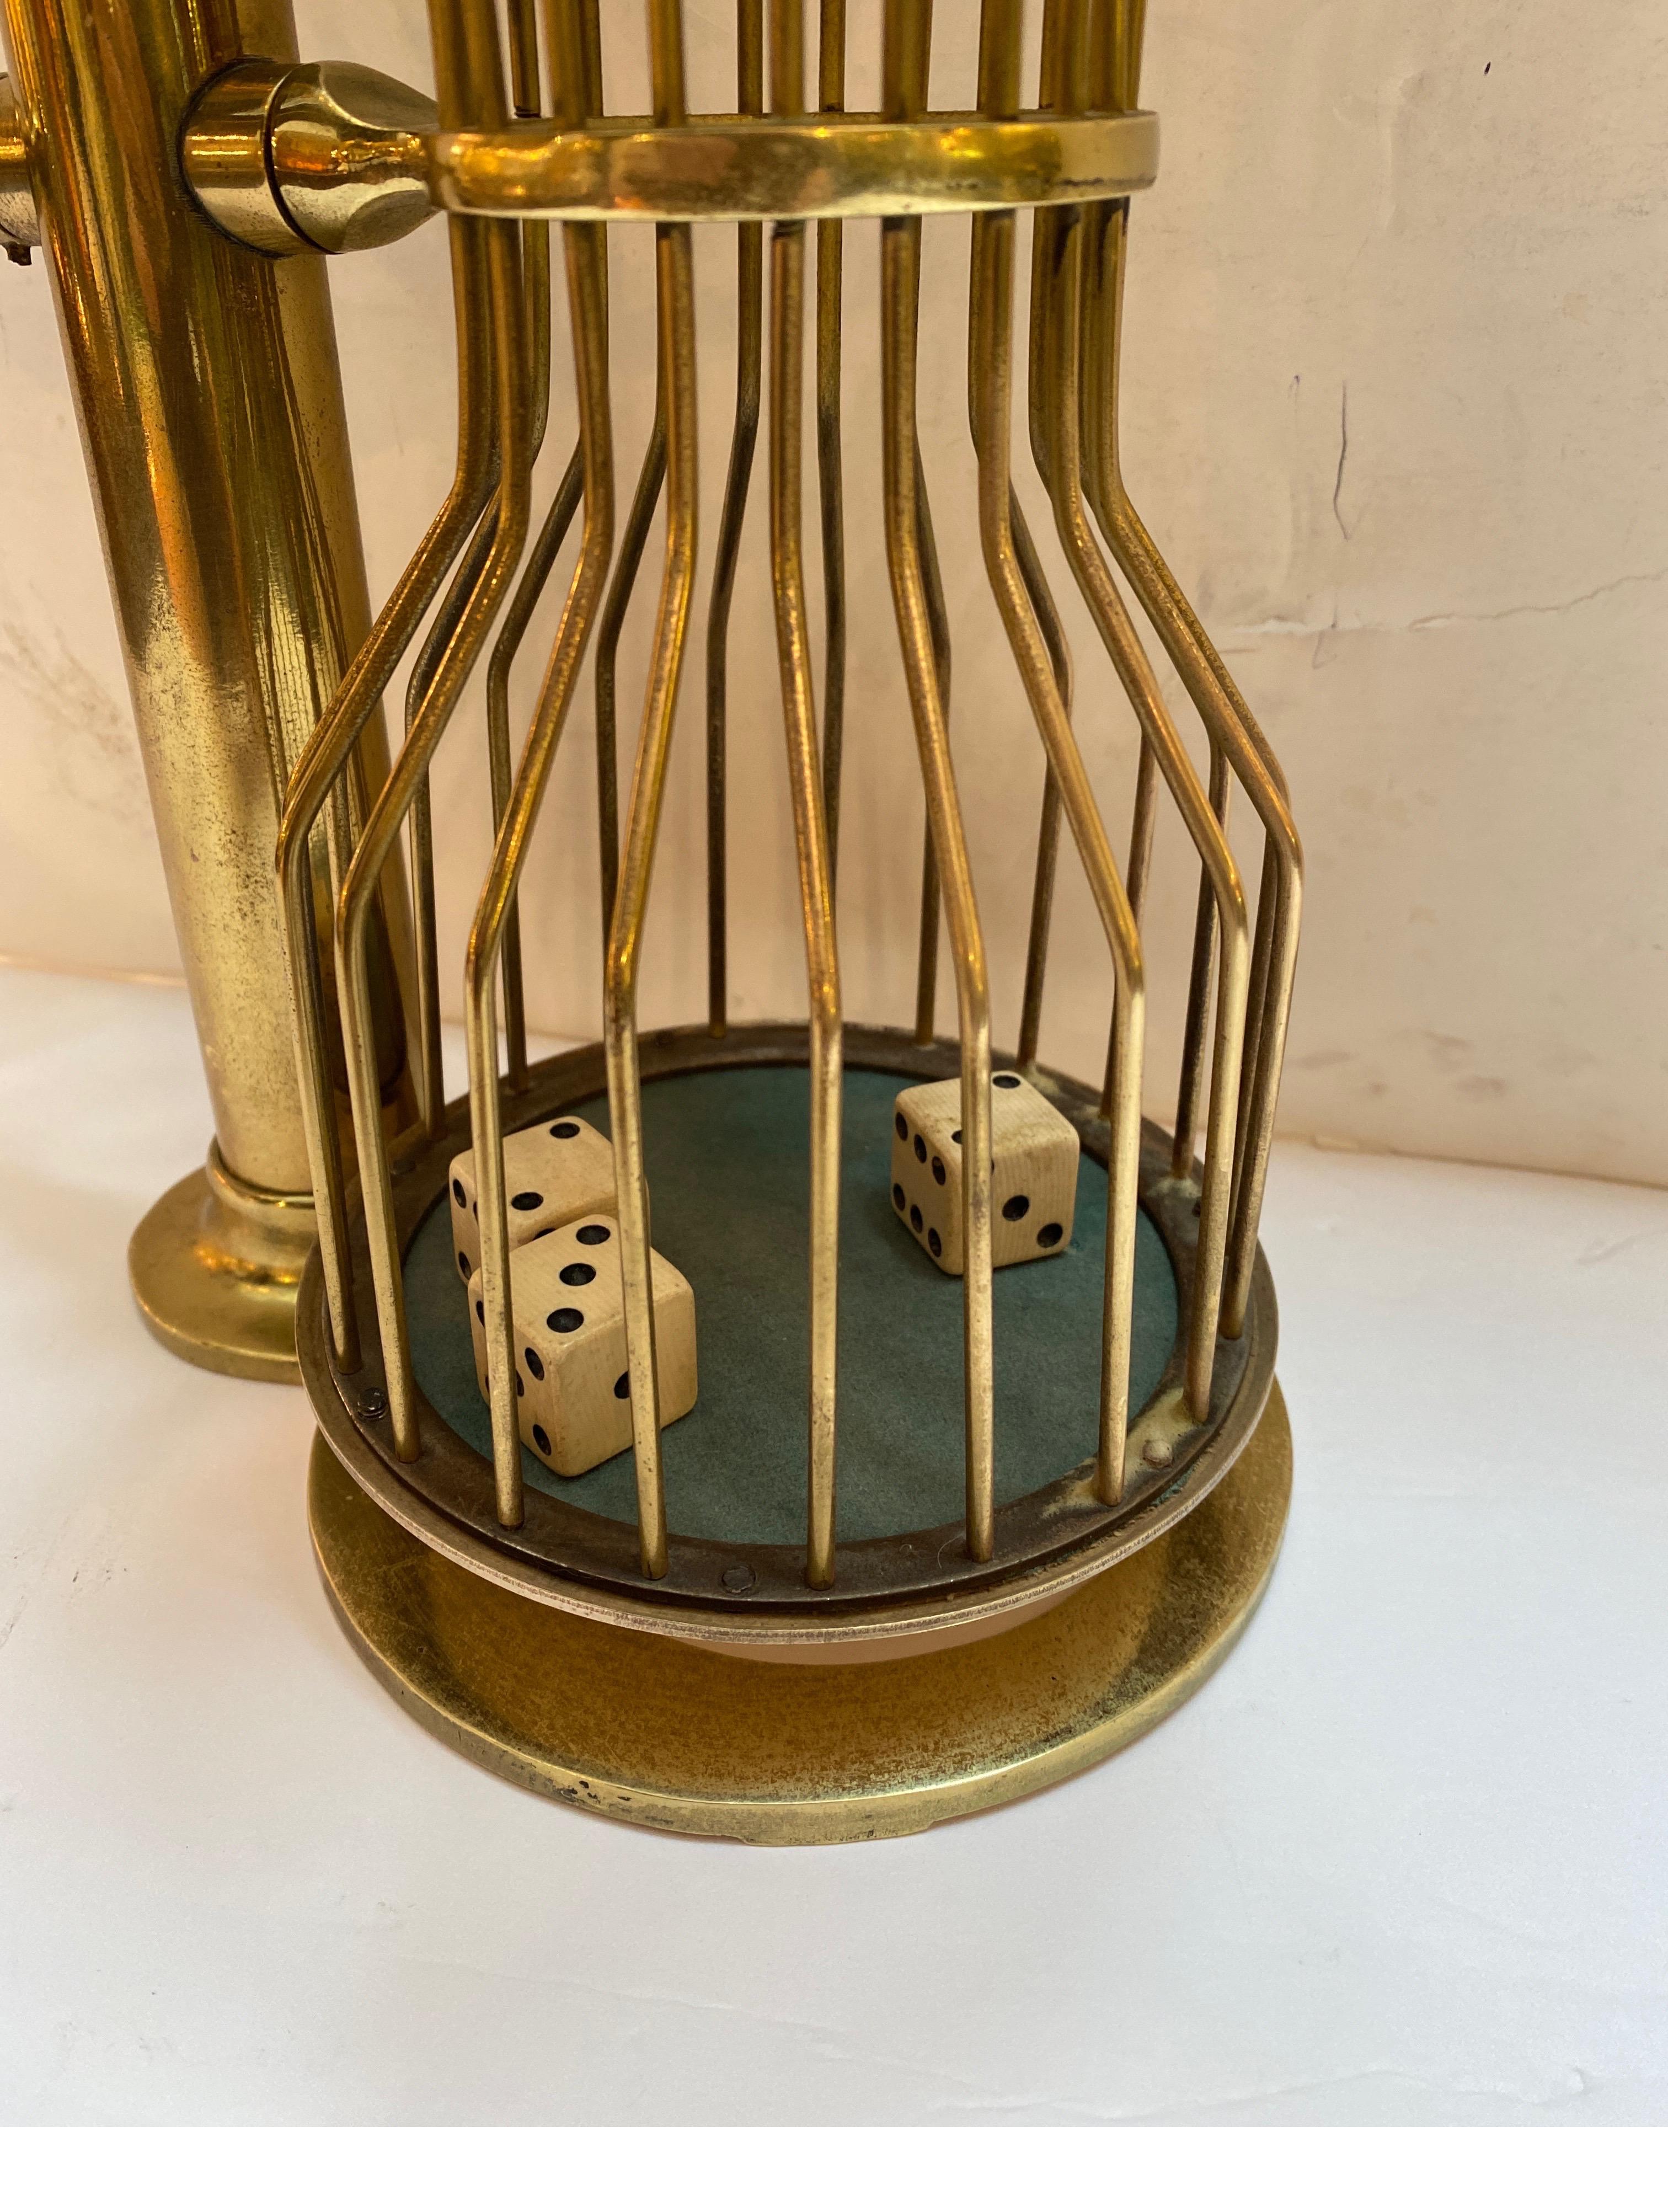 A brass 1930's cage with dice. Used for gambling and card game of 